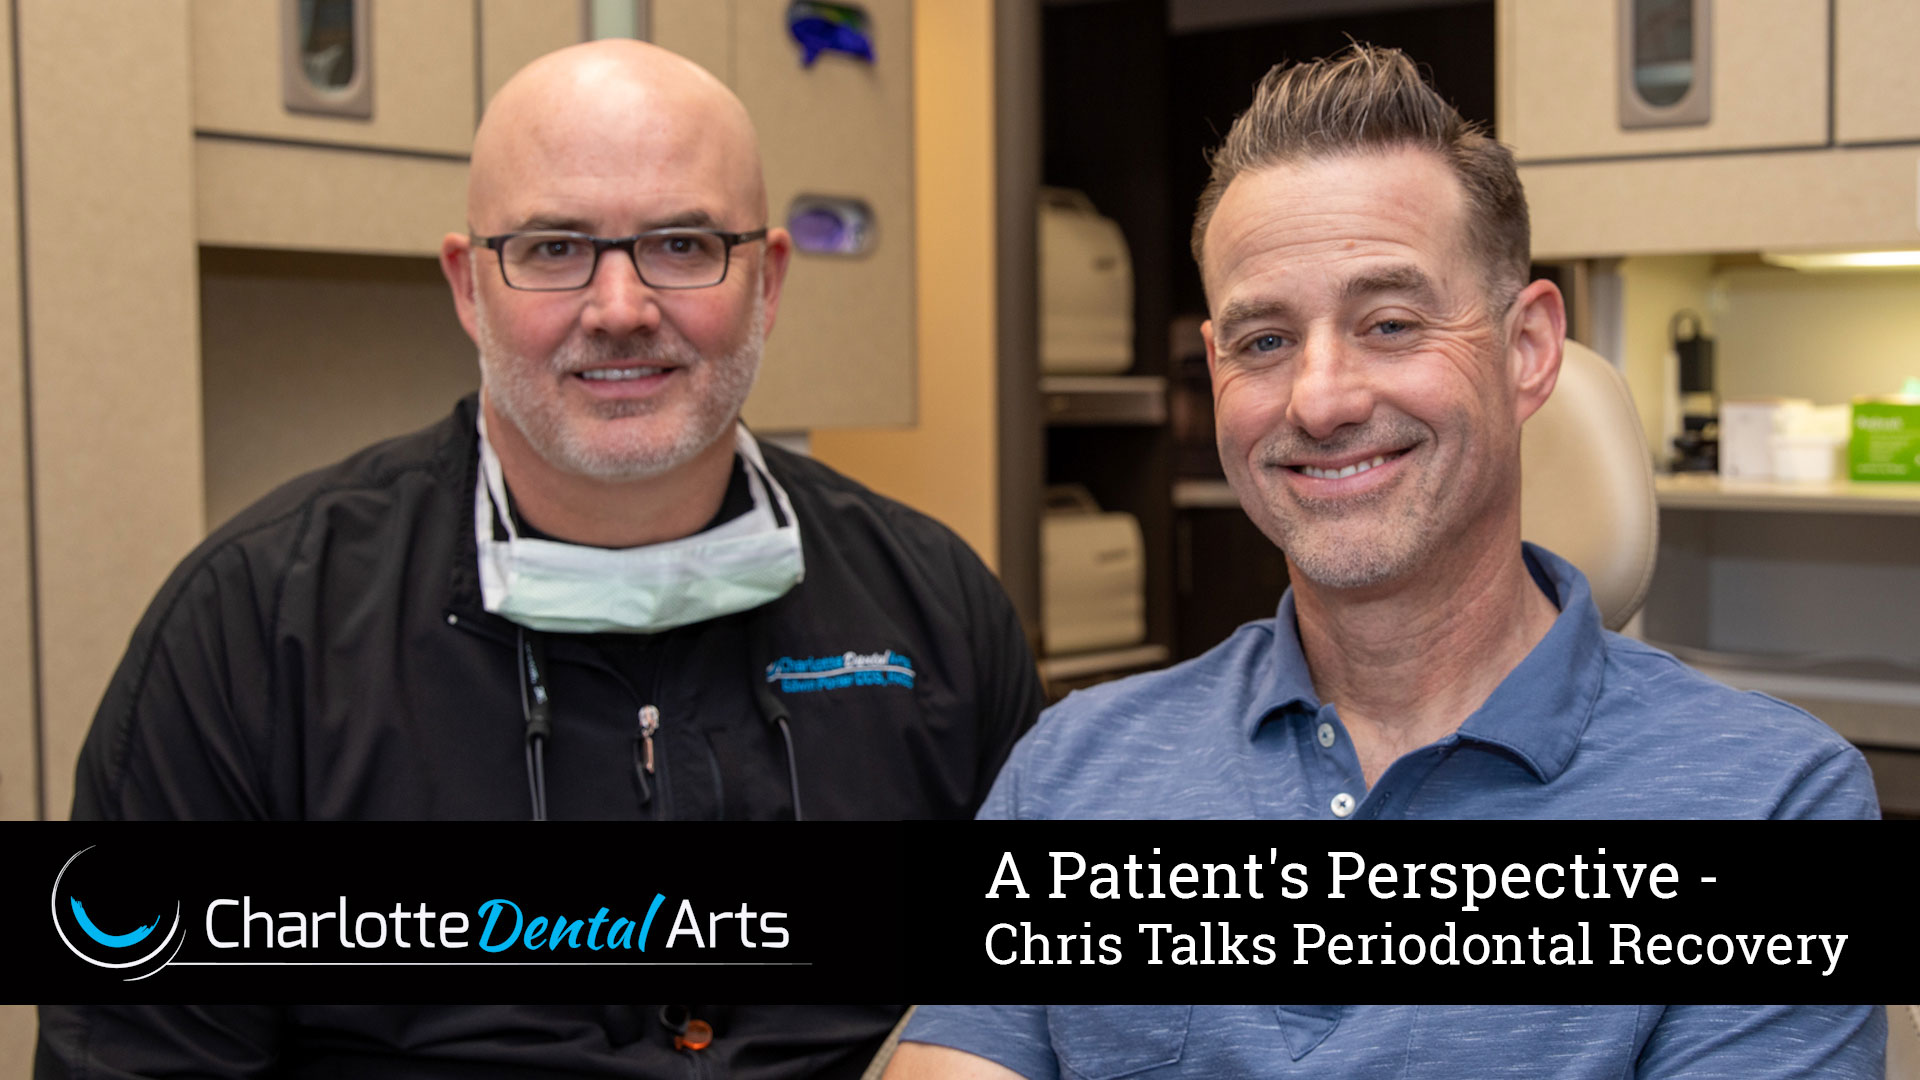 A thumbnail capturing the moment of a person's smile transformation, showcasing the successful journey from periodontal challenges to a healthy, confident smile.